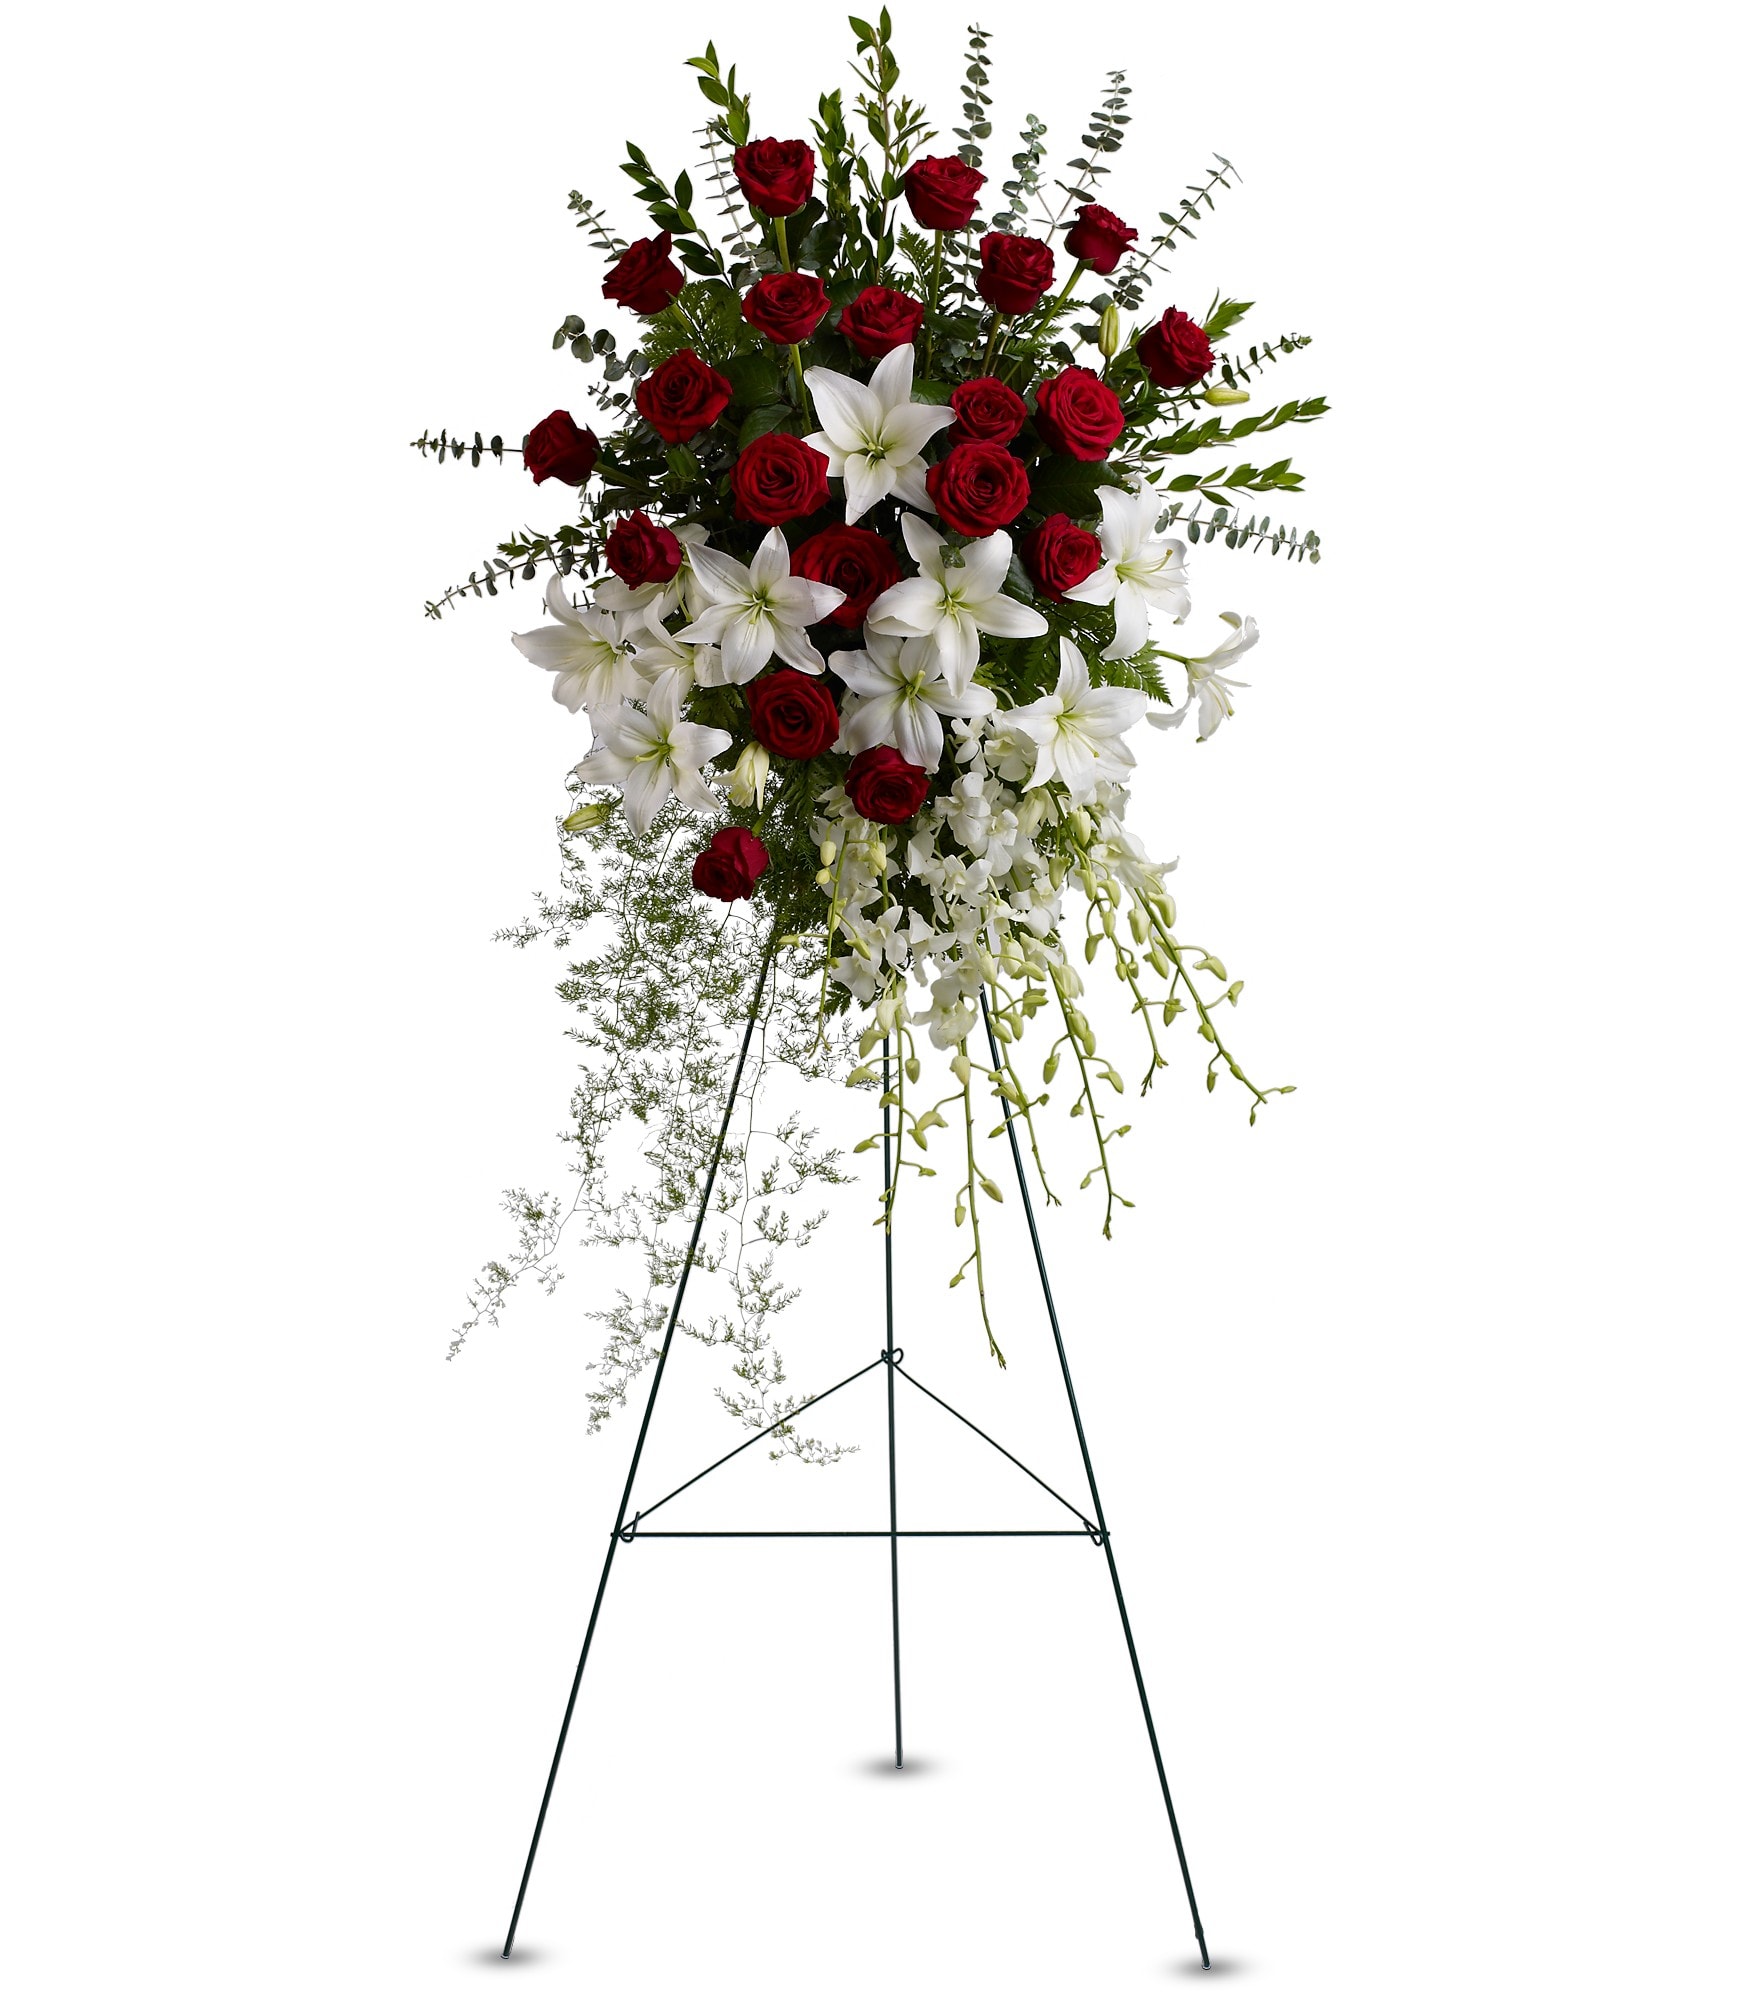 Lily and Rose Tribute Spray by Teleflora - Pure white lilies and dendrobium orchids mingle with red roses, white asiatic lilies and more in this magnificent and impressive standing spray of the finest blooms. A fitting tribute for a funeral, wake or memorial service.  A standing spray of lush flowers such as red roses, white dendrobium orchids and asiatic lilies - accented with greenery - is delivered on an easel.  Approximately 31&quot; W x 50&quot; H  Orientation: One-Sided  As Shown : T226-1A